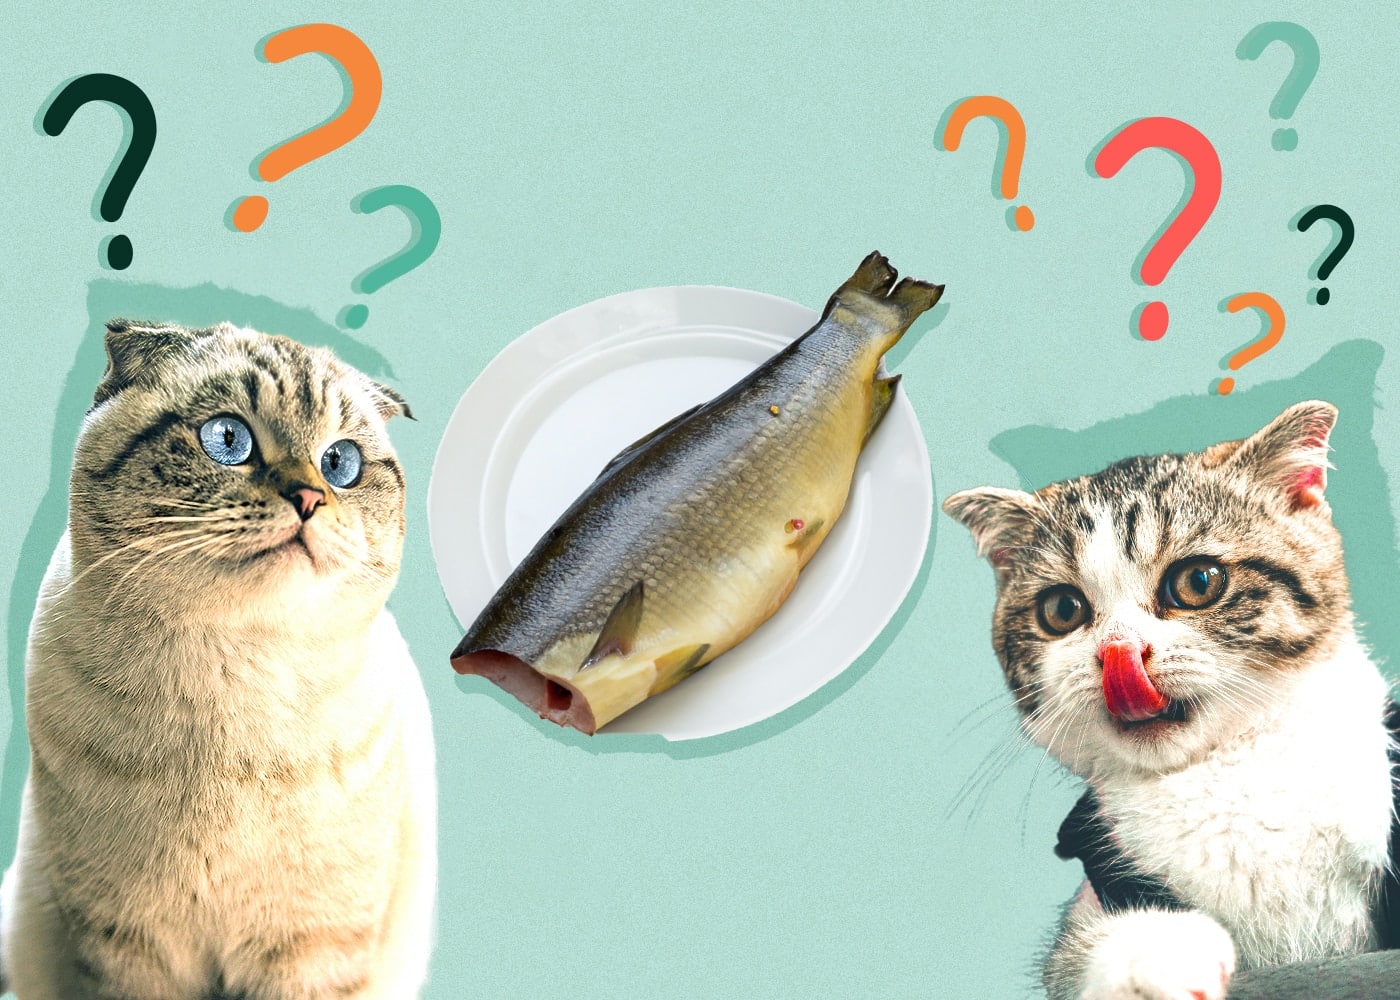 Is Eating Raw Fish Safe and Healthy?